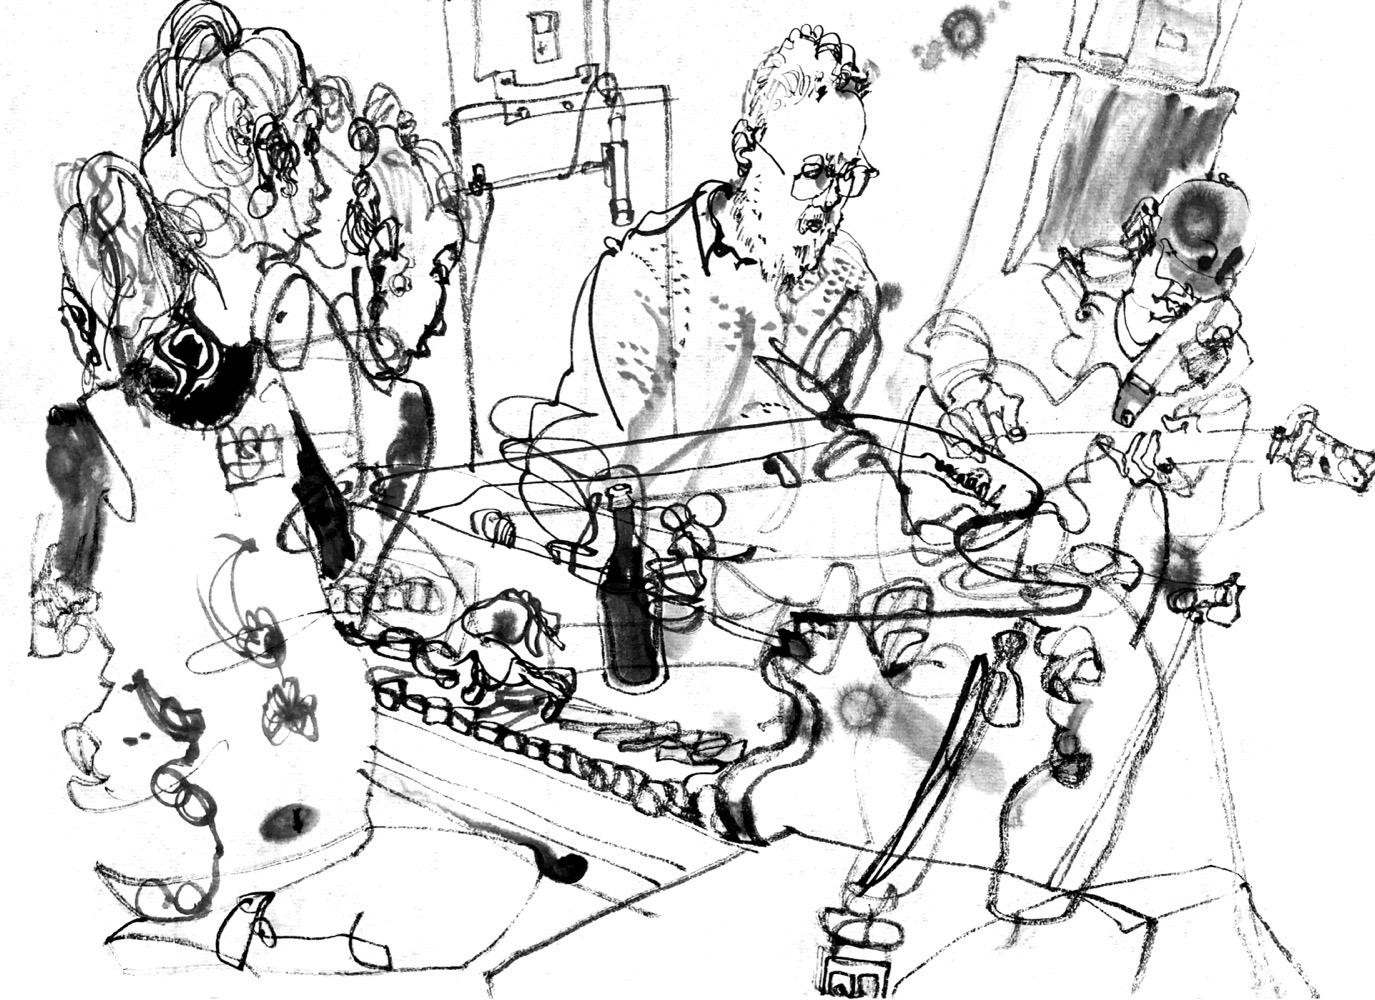 Ink drawing of three musicians - woman on actually two pianos, depicted three times + a man on electronics + another man on guitar and daxophone.